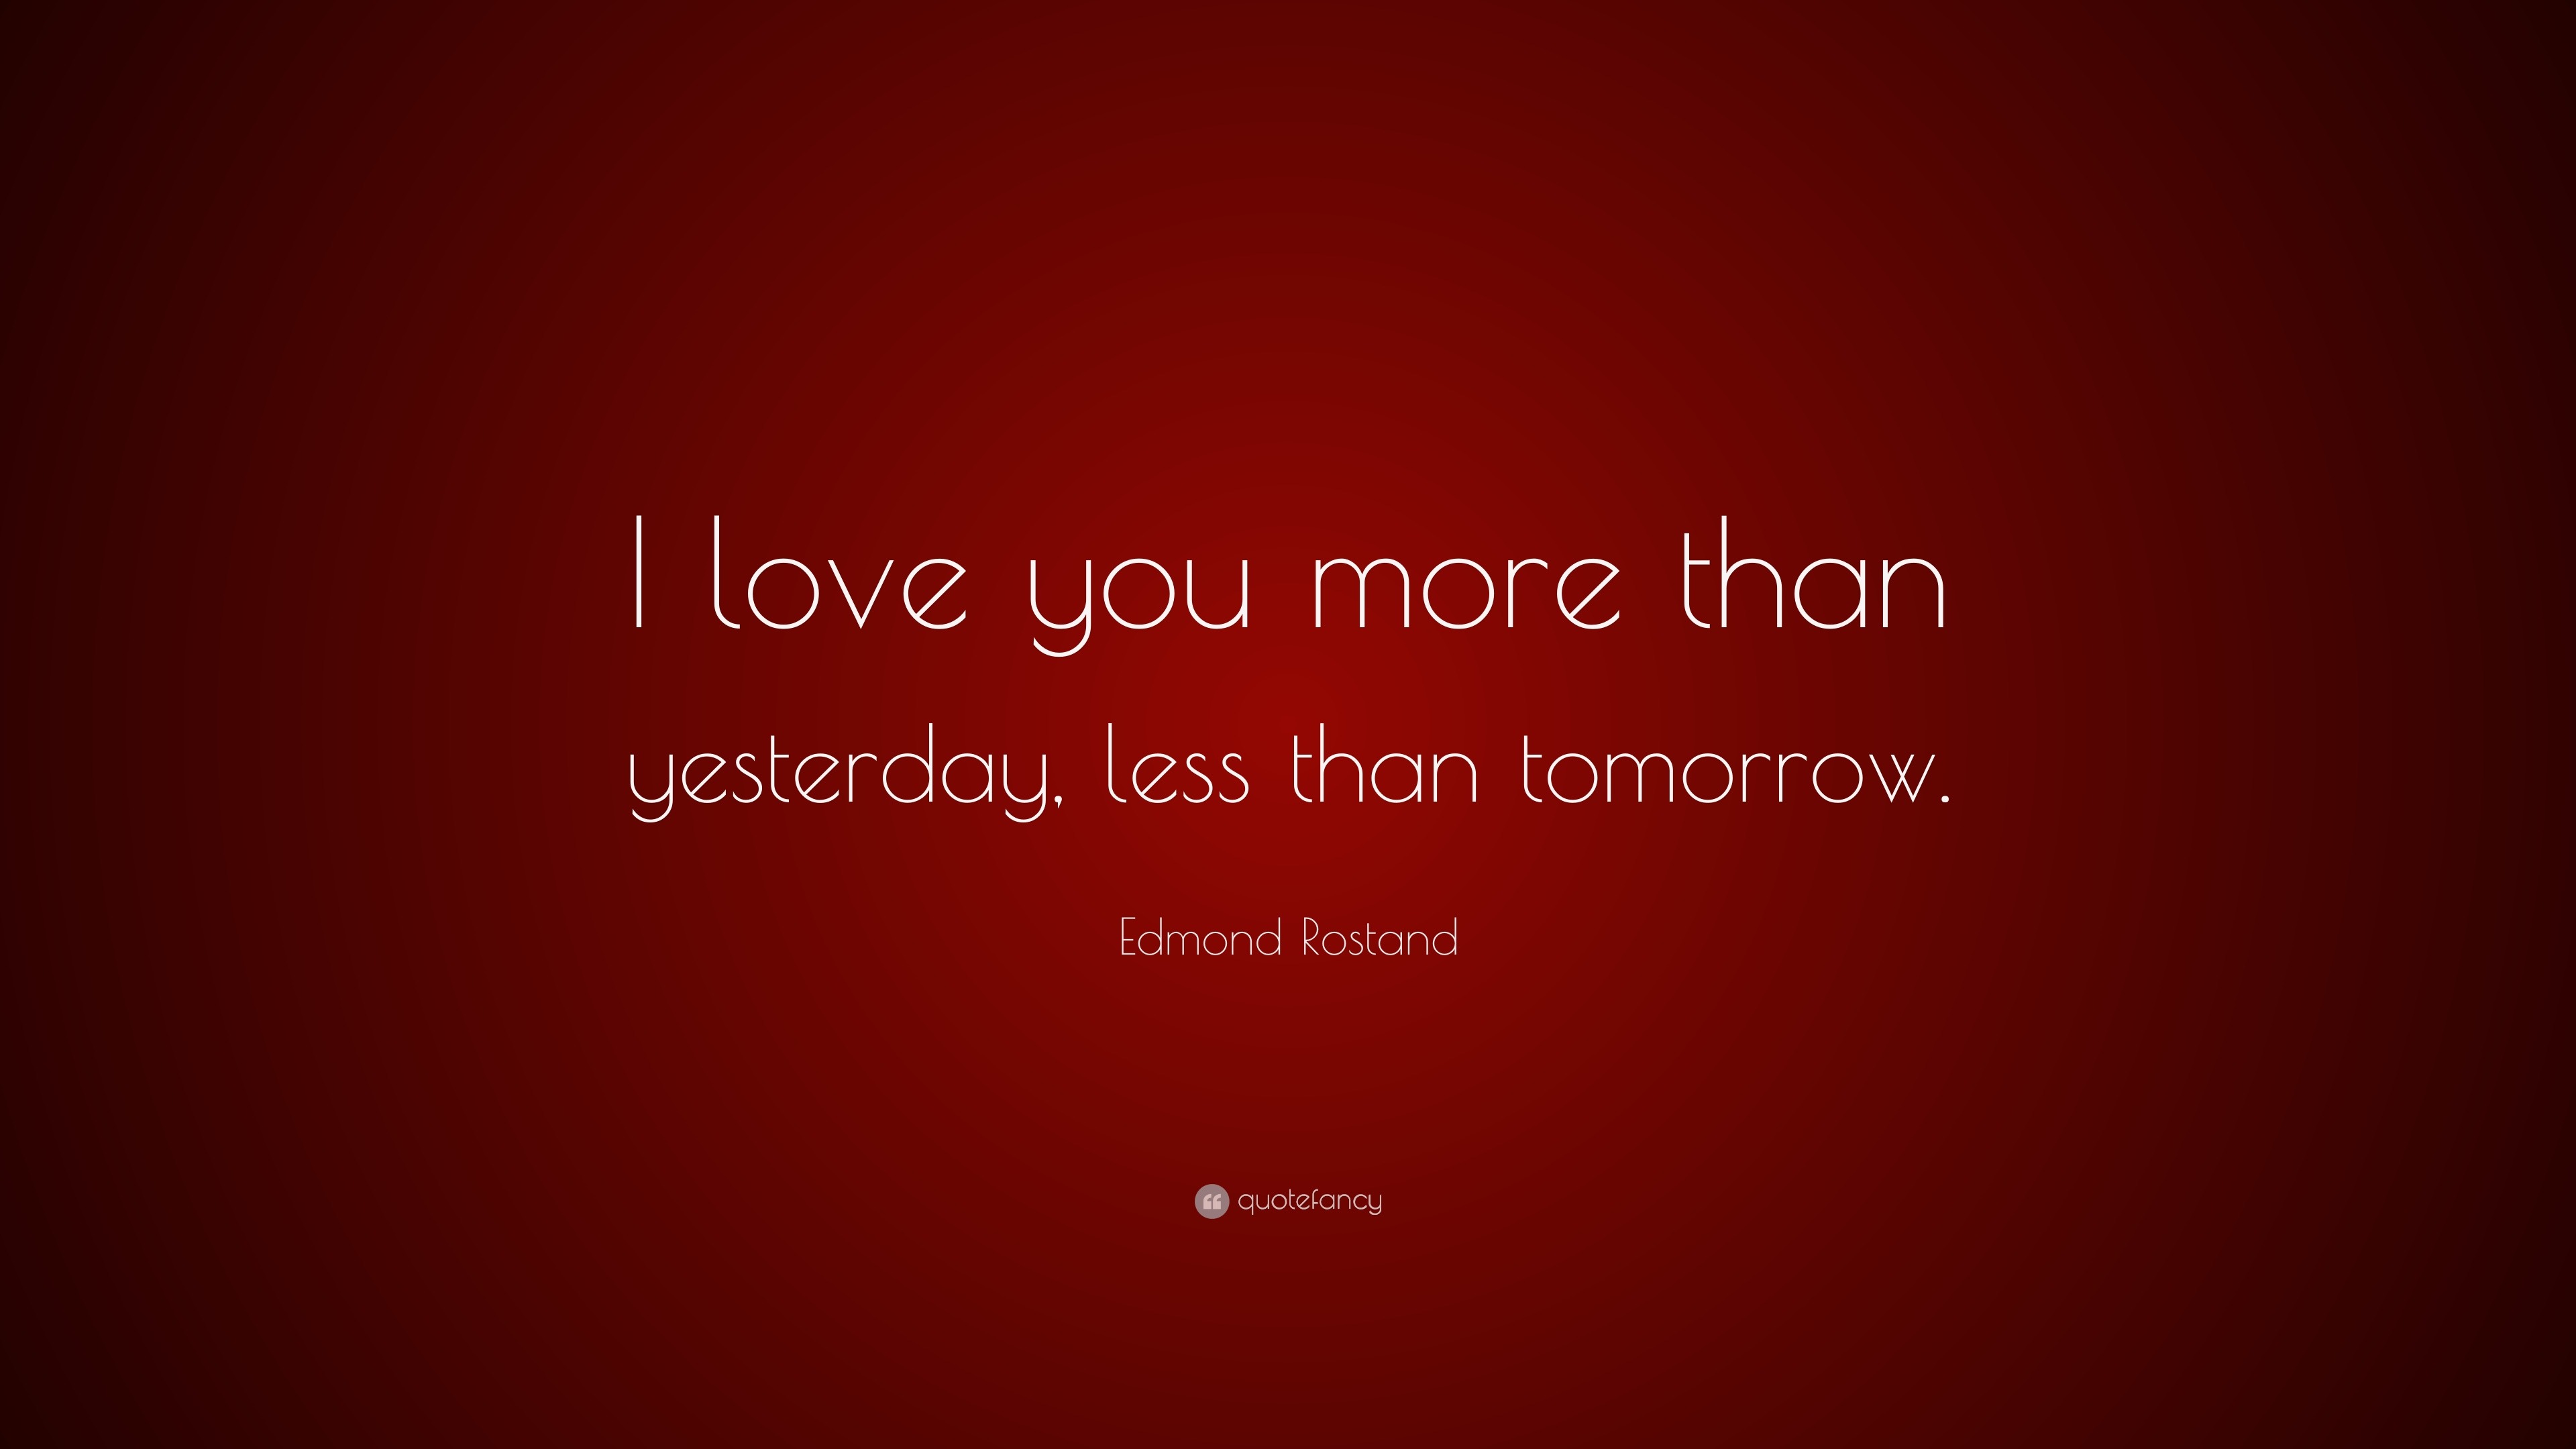 Edmond Rostand Quote I Love You More Than Yesterday Less Than Tomorrow